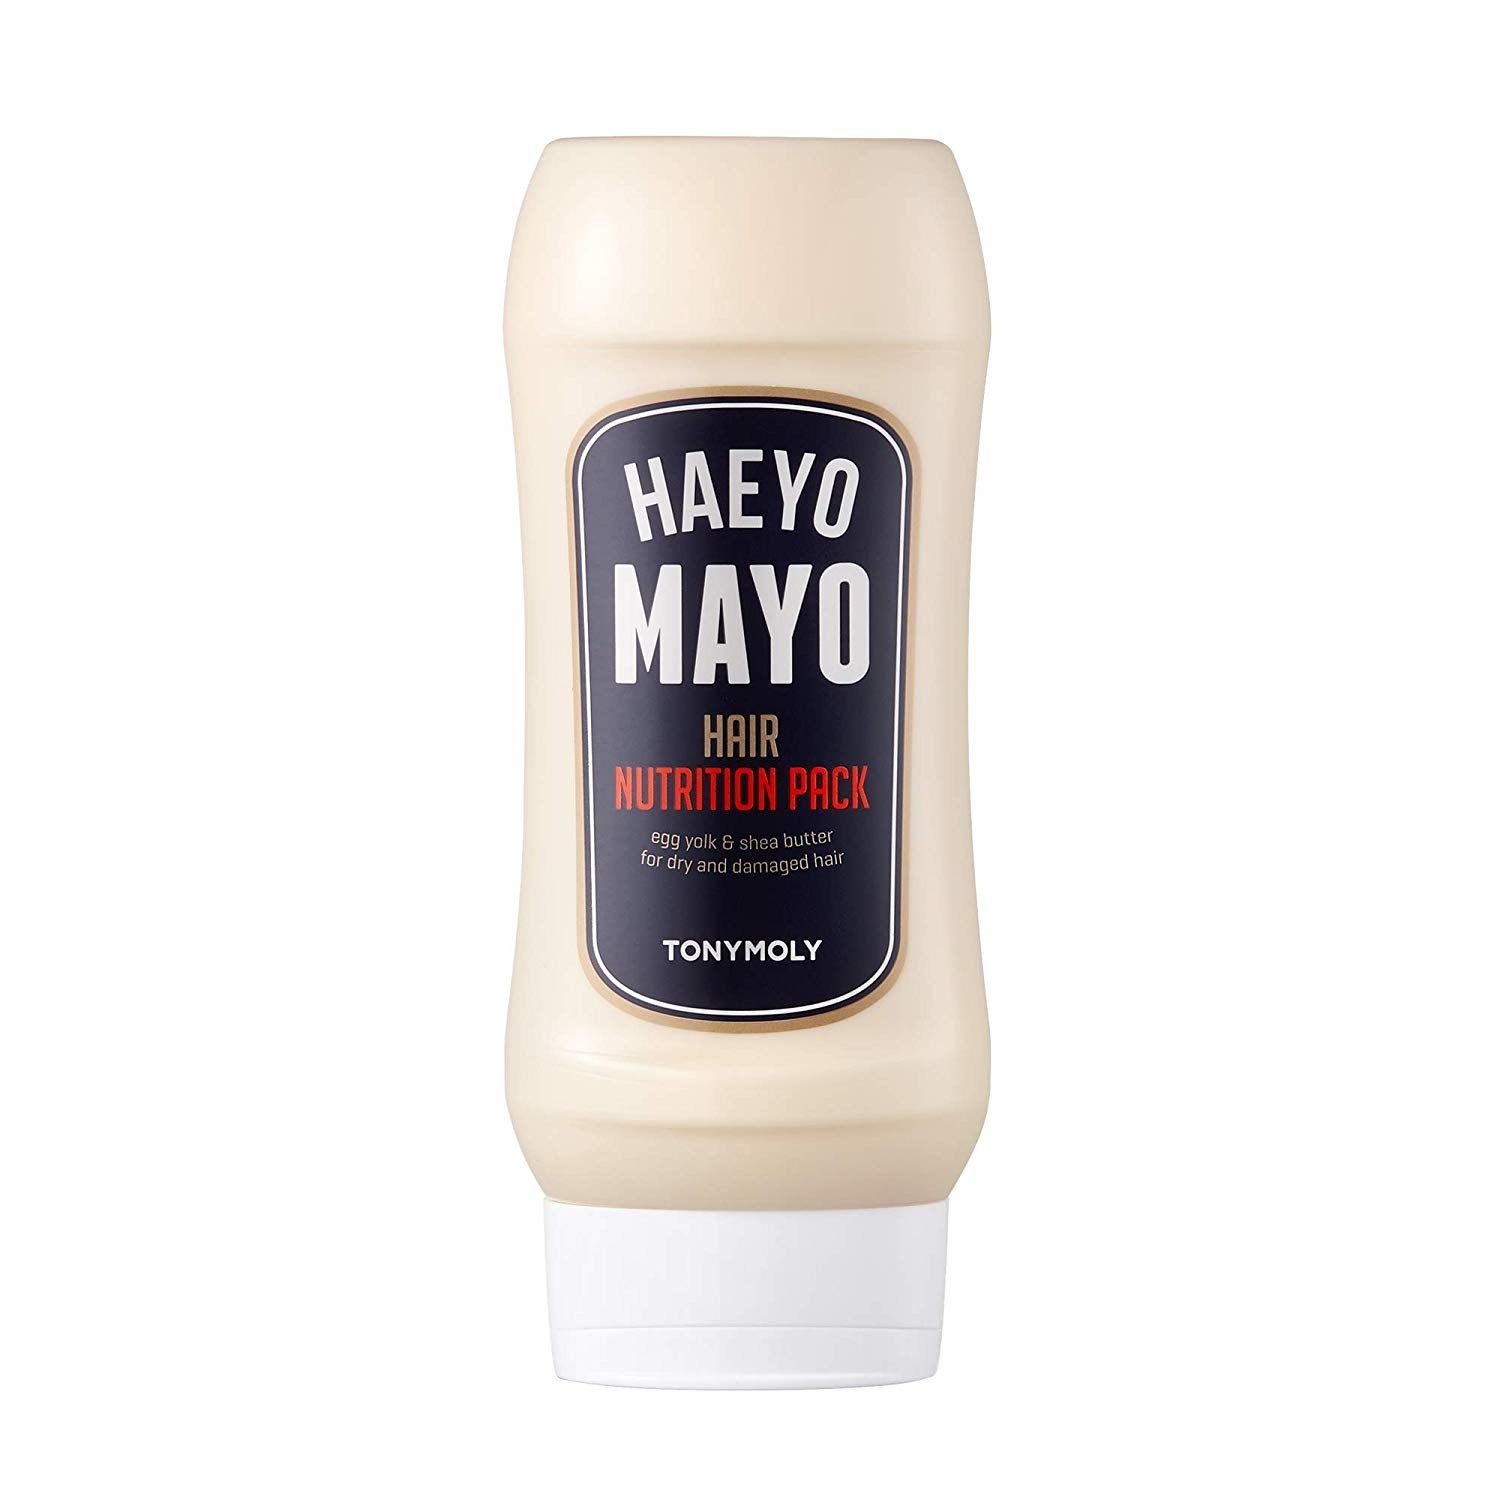 the bottle, which looks like a mayonnaise bottle